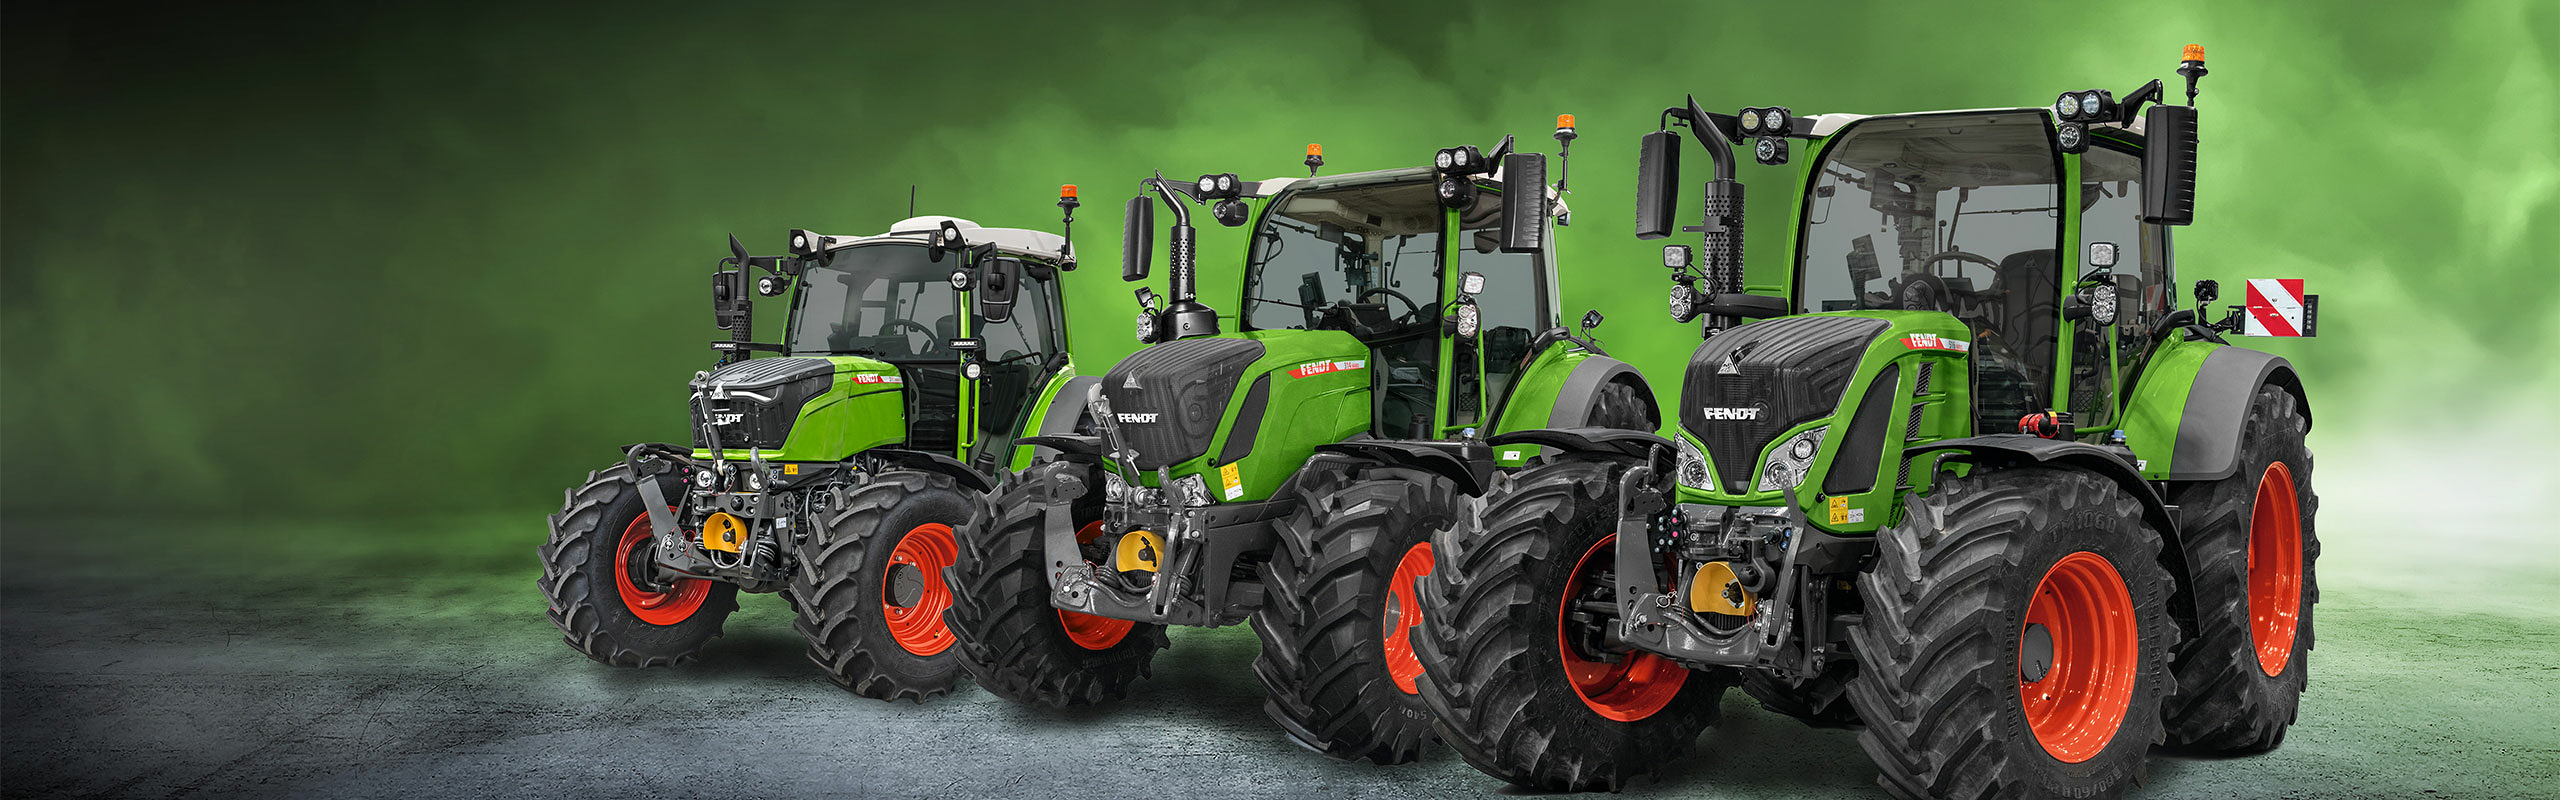 A Fendt 200, 300 and 500 Vario tractor stand side by side against a green background.